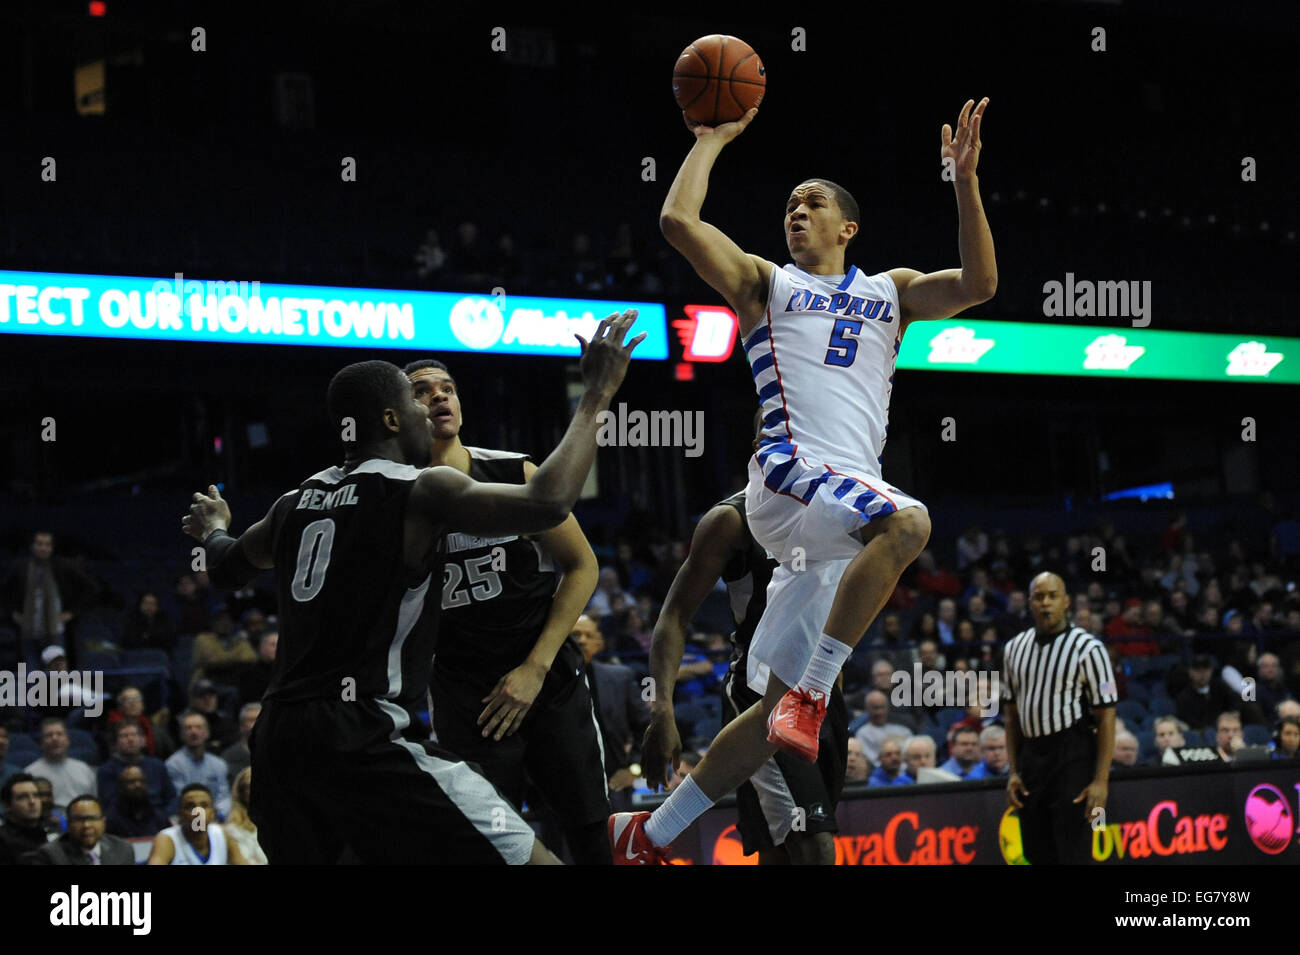 Rosemont, Illionois, USA. 18th February, 2015. DePaul Blue Demons guard Billy Garrett Jr. (5) takes a flying shot on basketball during the NCAA men's basketball game between the Providence Friars and the DePaul Blue Demons at the Allstate Arena in Rosemont, IL. Providence won 80-53 over DePaul. Credit:  Cal Sport Media/Alamy Live News Stock Photo